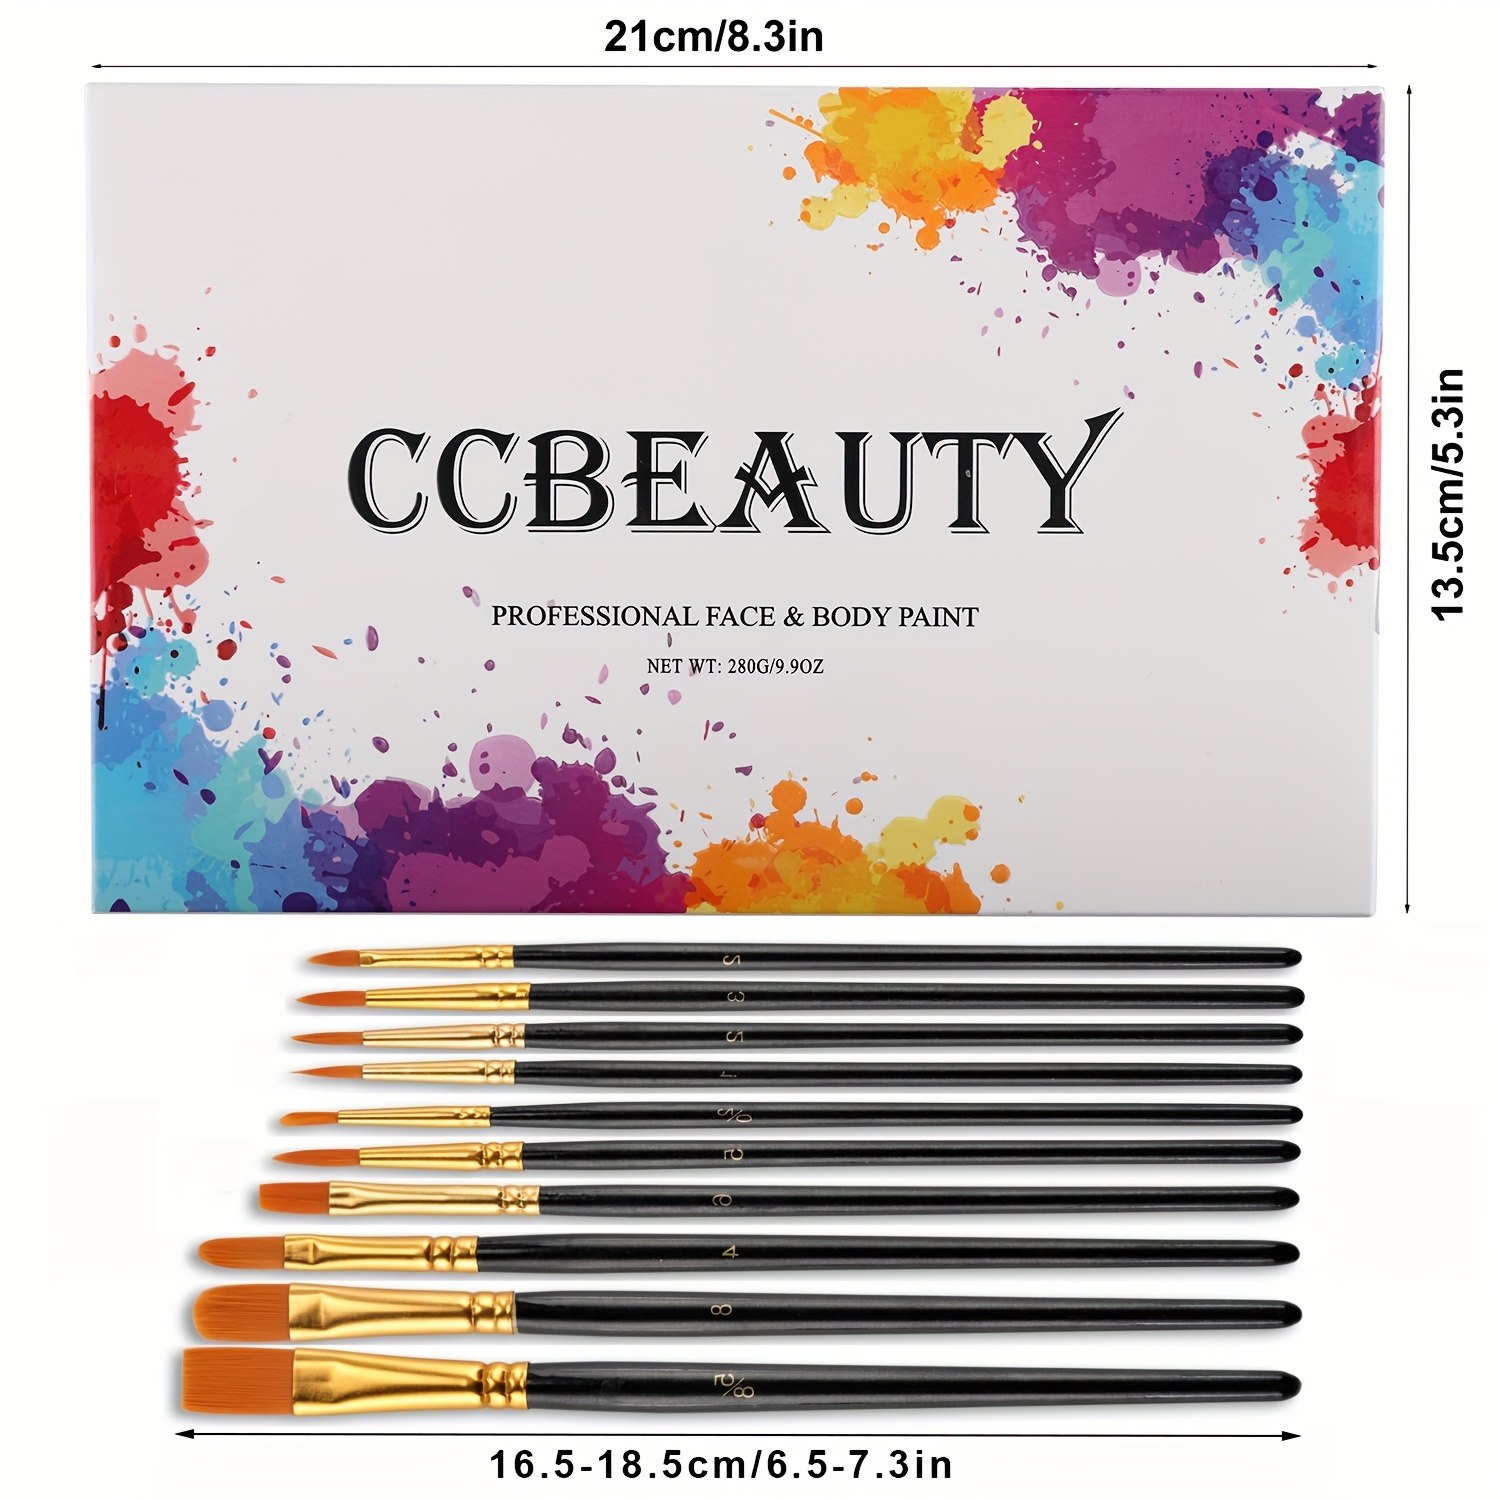 CCbeauty Professional 36 Colors Face Body Paint, Philippines